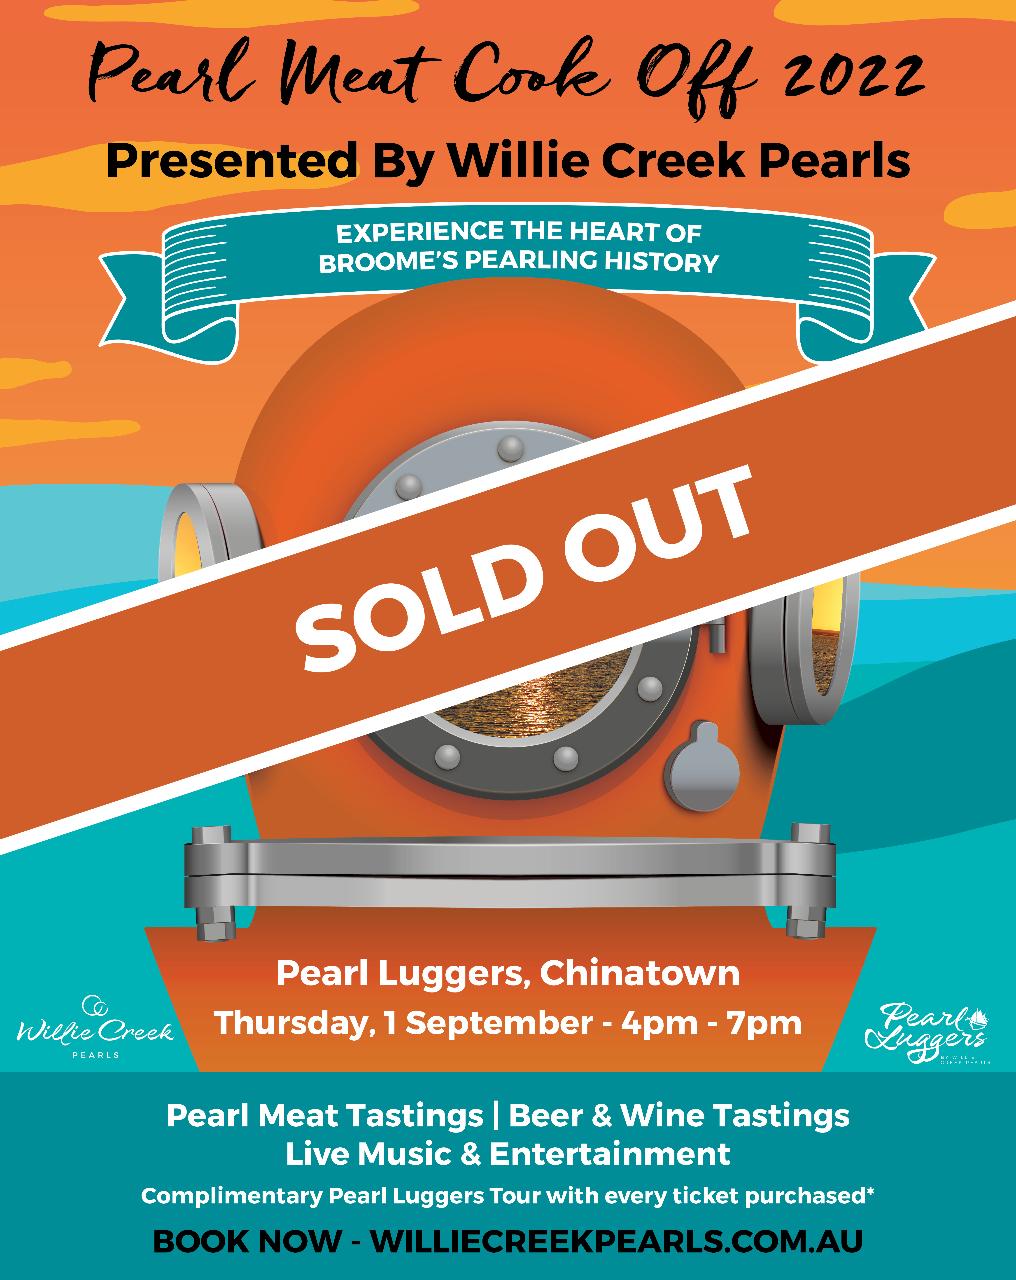 Pearl Meat Cook Off 2022 Presented By Willie Creek Pearls Event Ticket